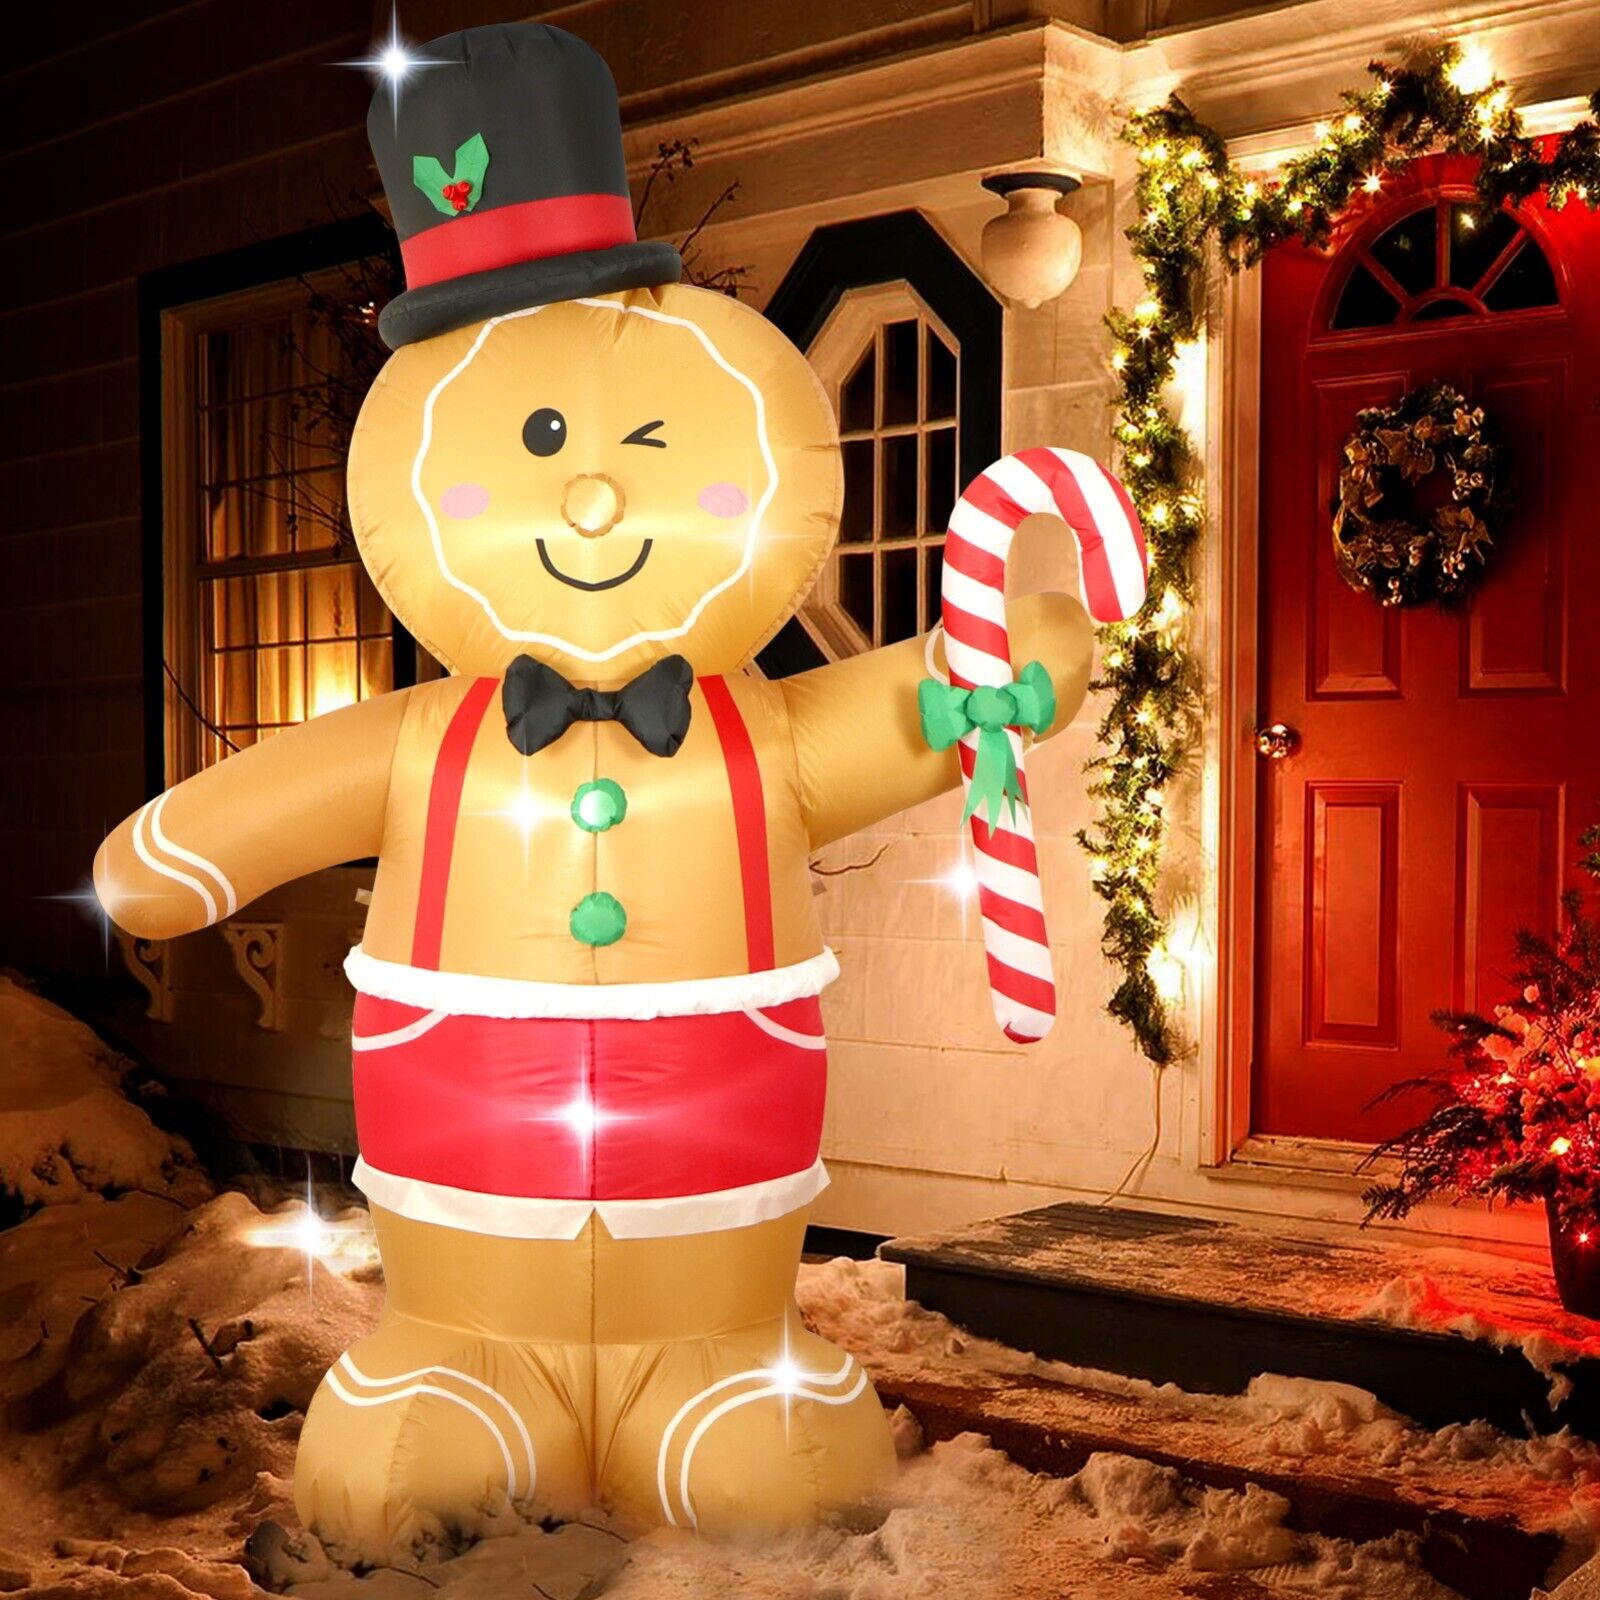 Fanshunlite 8FT Christmas Inflatable Gingerbread Man with Candy Cane Led Light